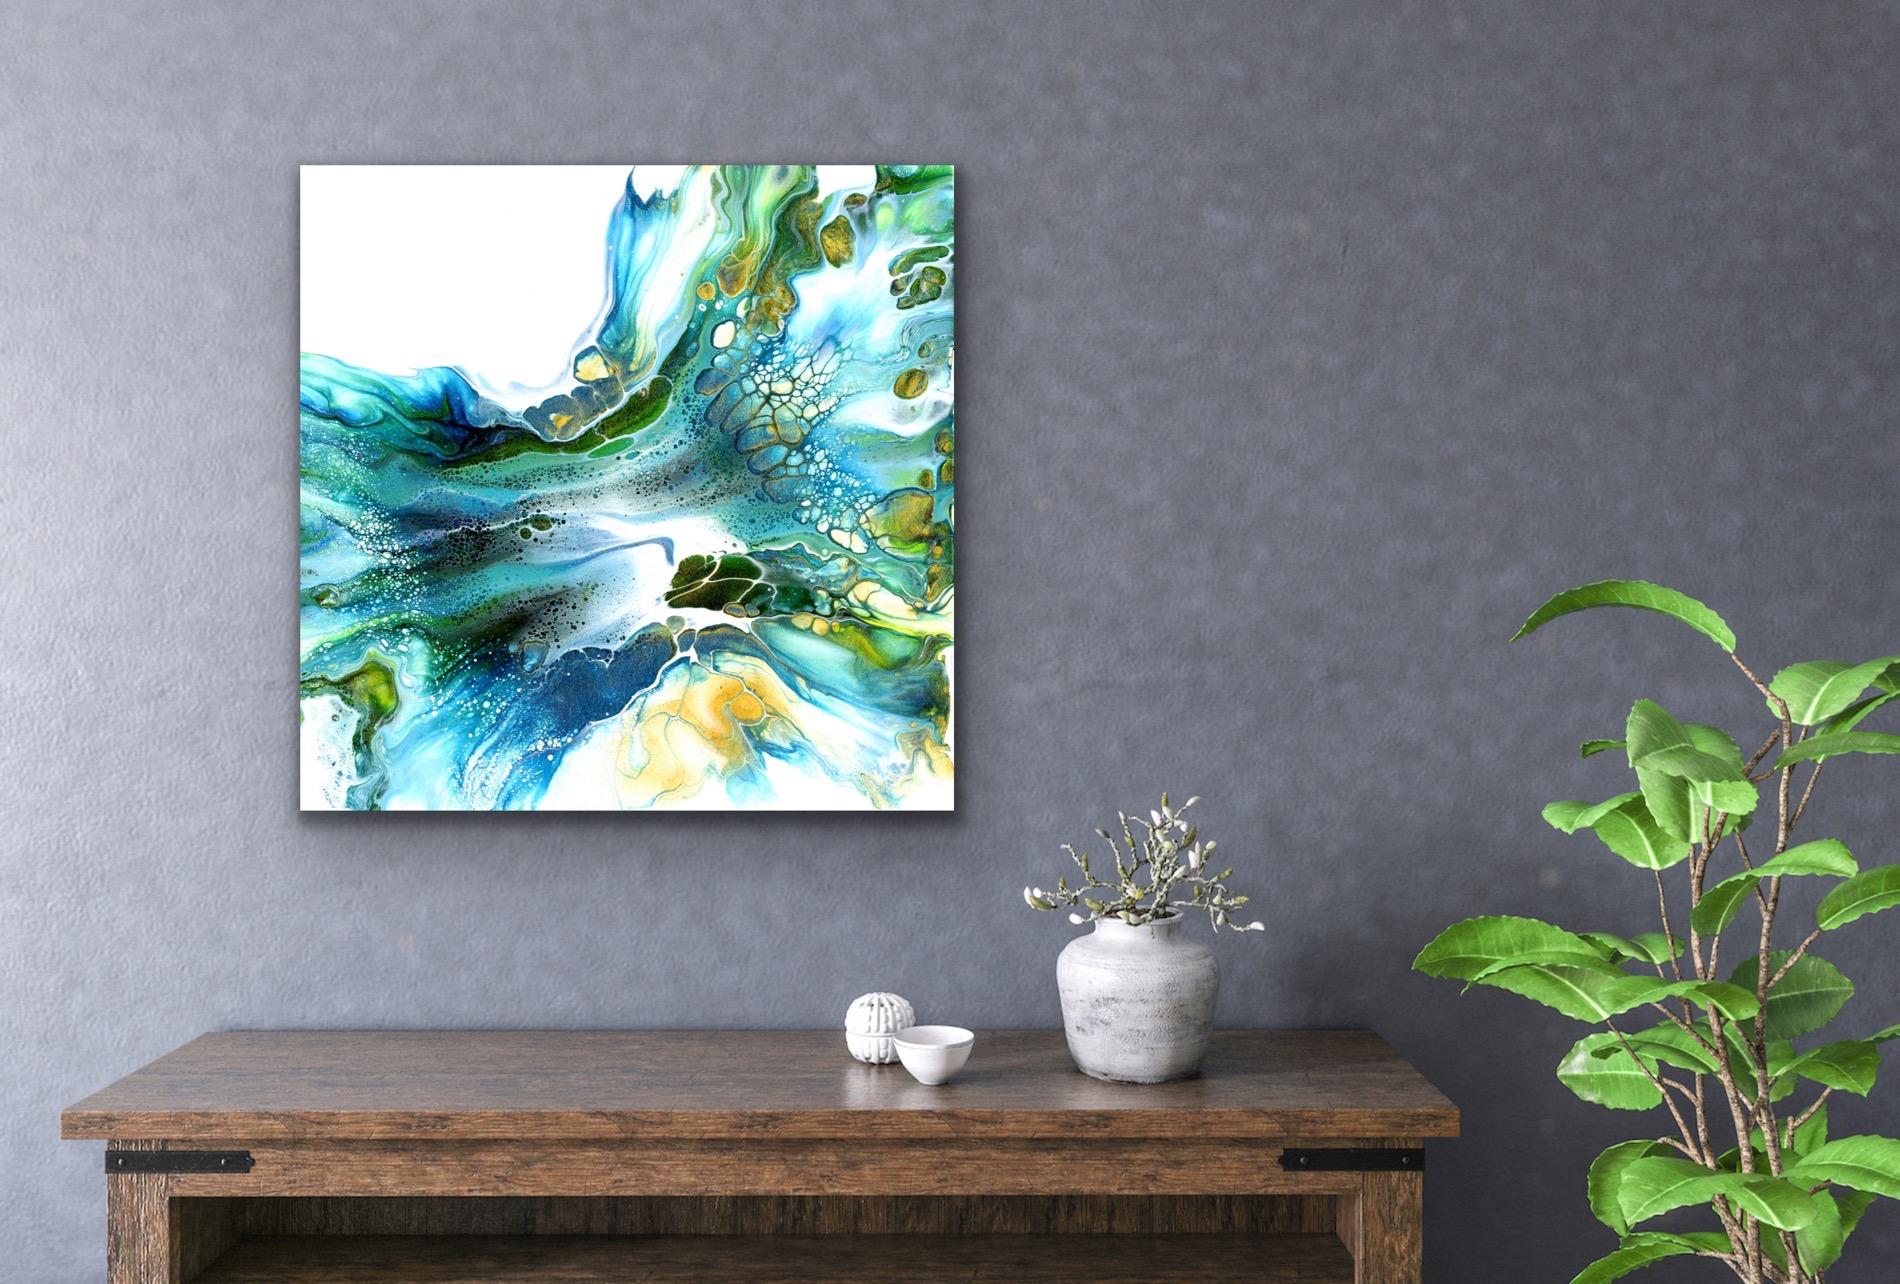 Contemporary Modern Abstract, Giclee Print on Metal, Limited Edition, by Cessy  2